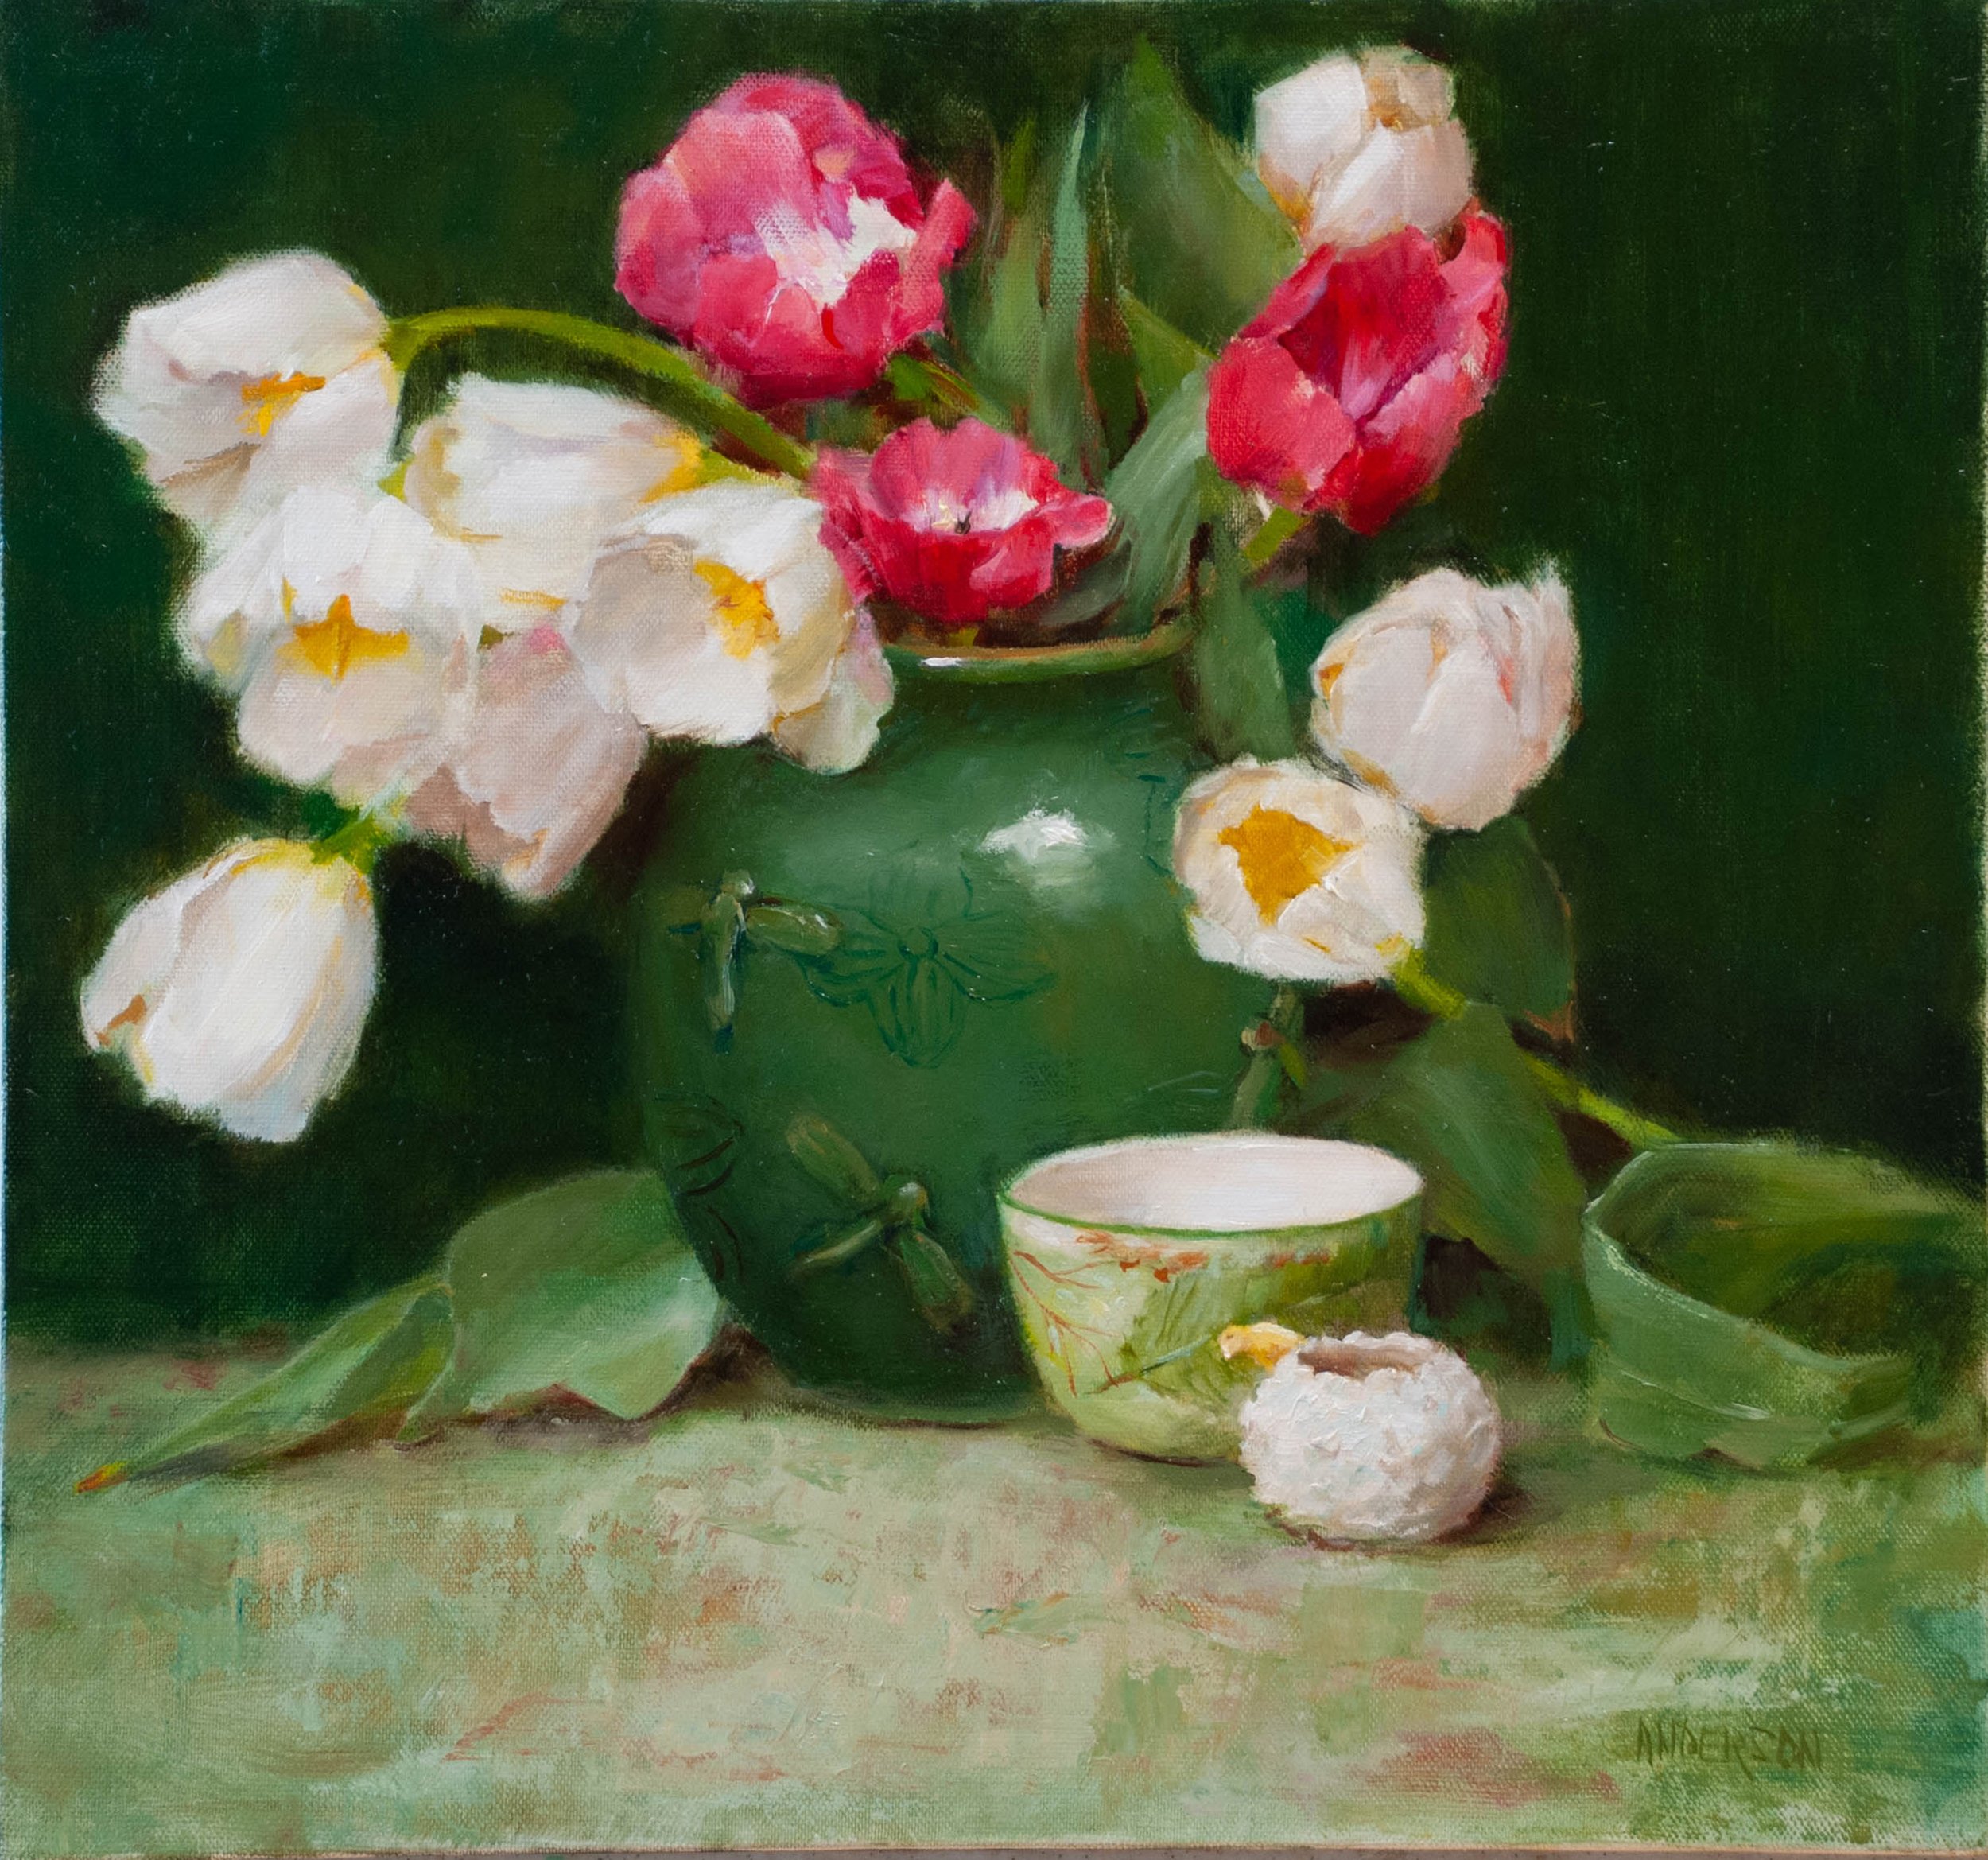 Tulips with Dragonfly Vase, 15X16.jpg